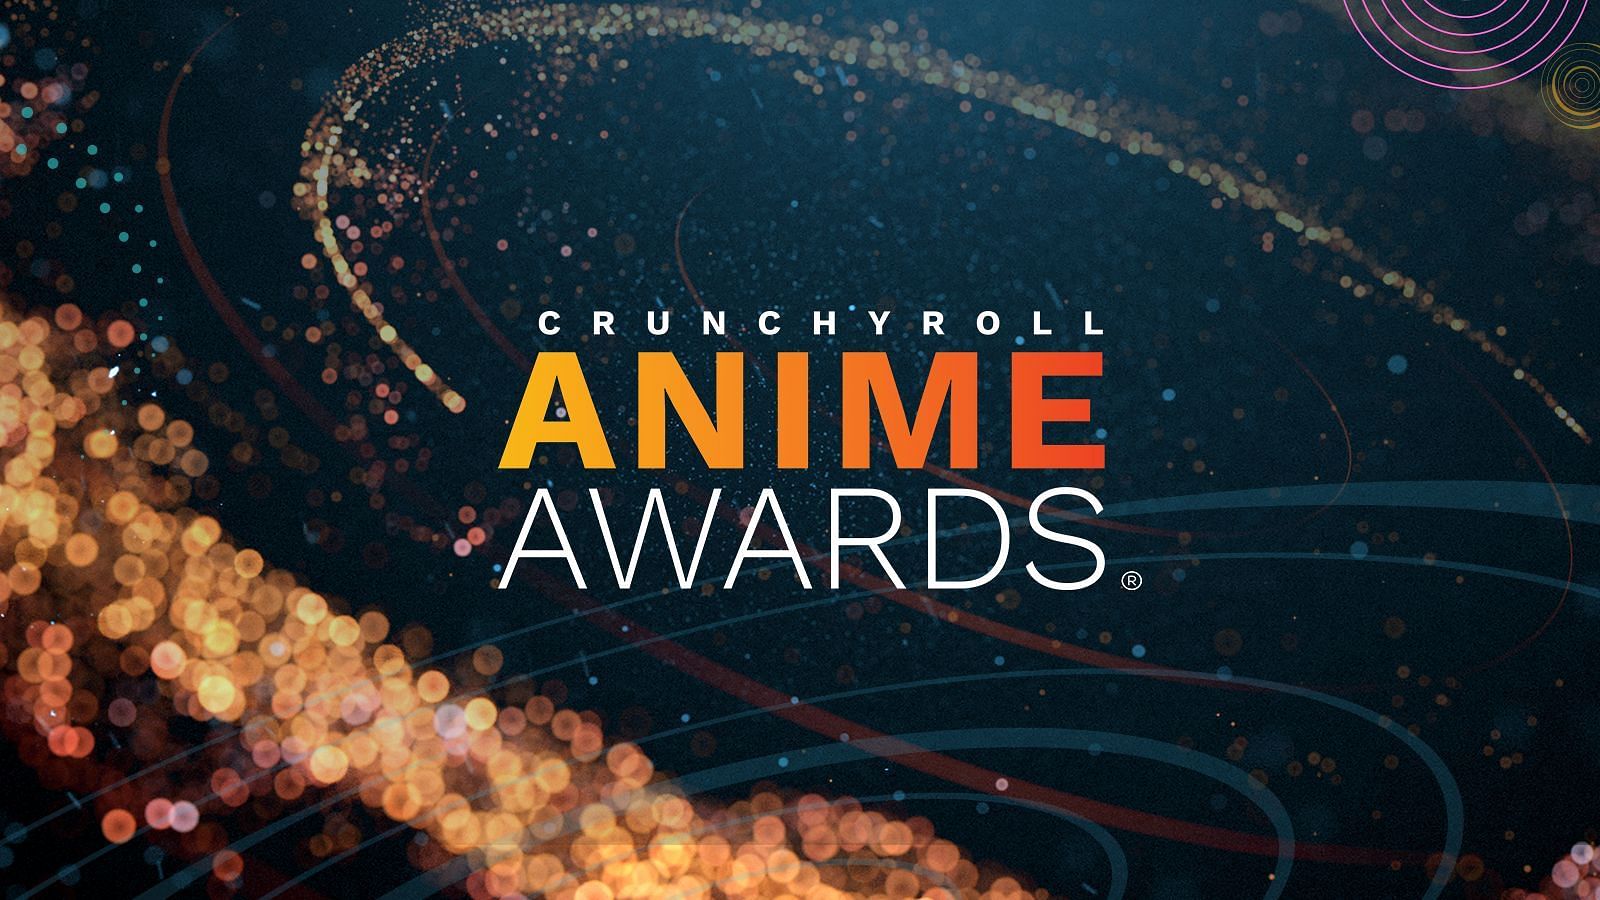 The winners of the Crunchyroll Anime Awards feature controversial choices